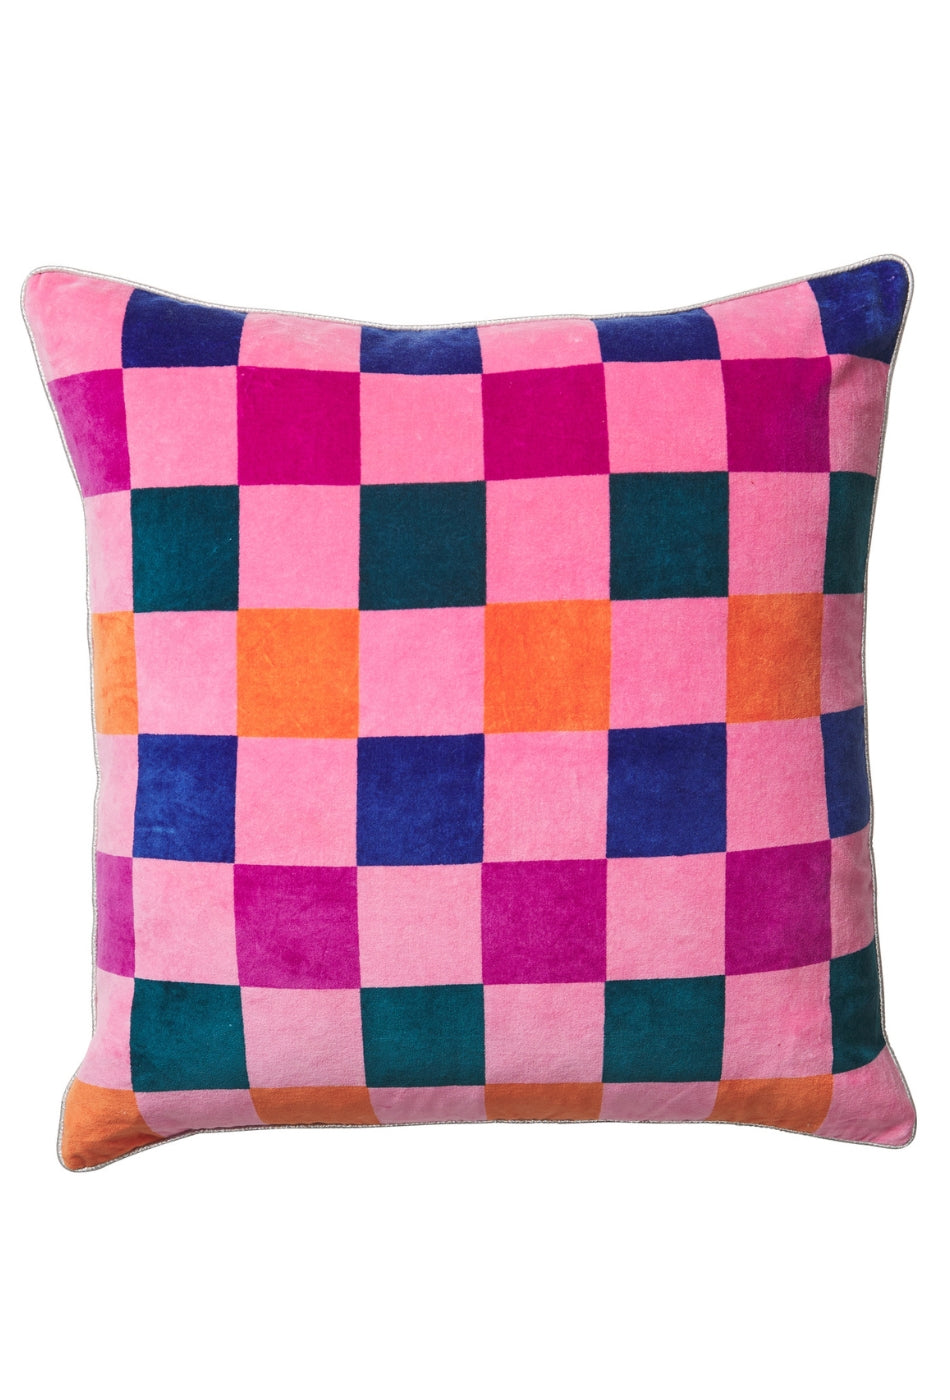 Damas Checkerboard Cushion - Cosmos-SAGE AND CLARE-P&K The General Store